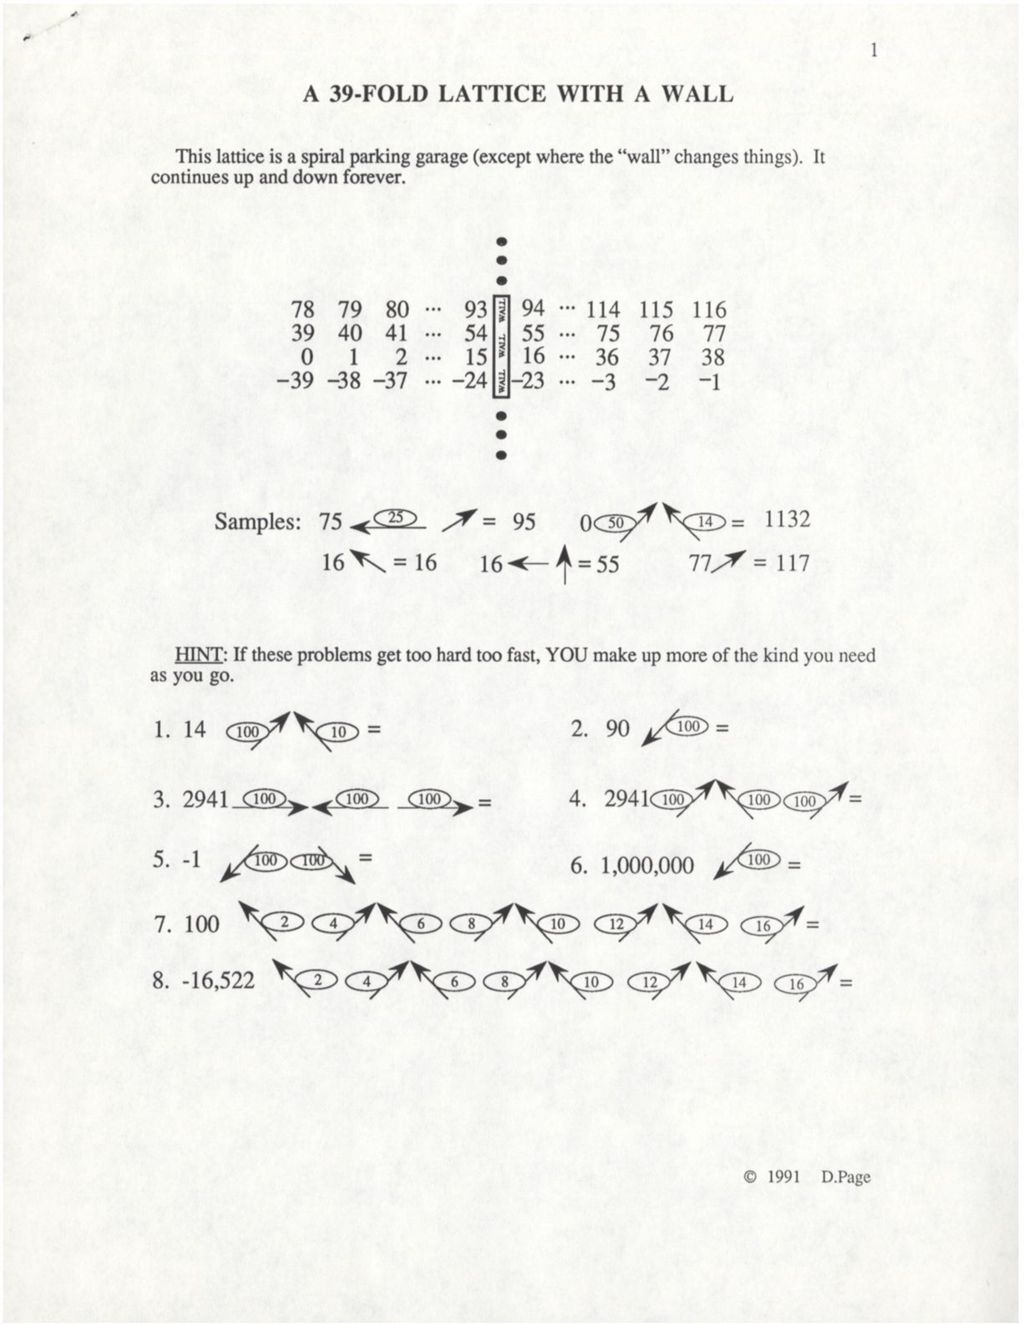 A 39-Fold Lattice with a Wall (lattice, examples, and problems, Answer Key) (1991)